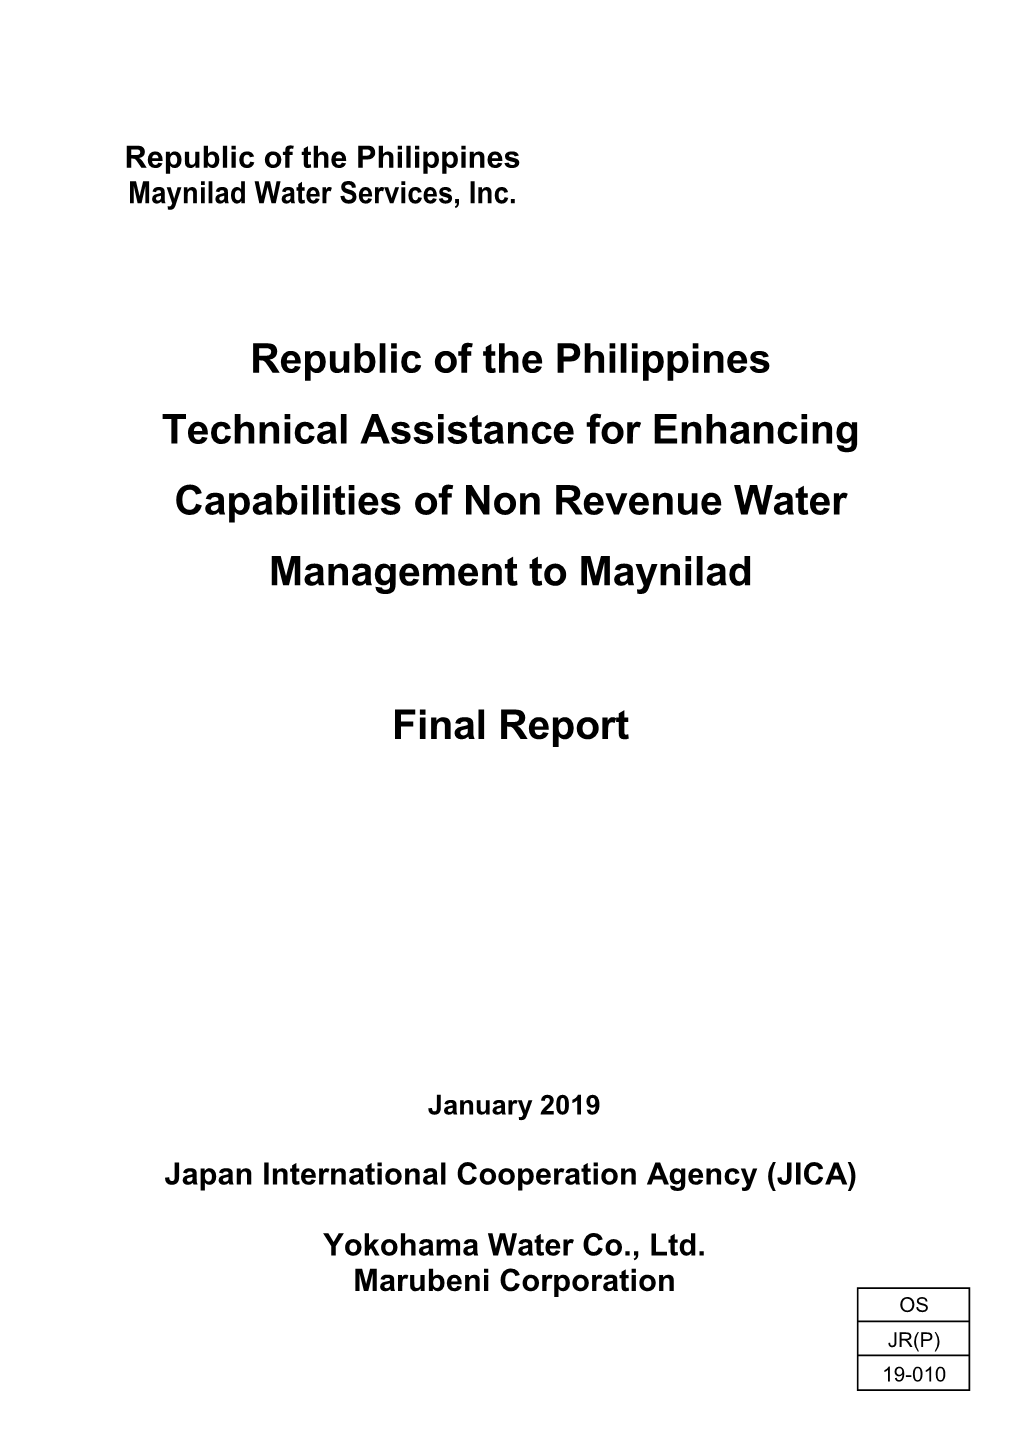 Republic of the Philippines Technical Assistance for Enhancing Capabilities of Non Revenue Water Management to Maynilad